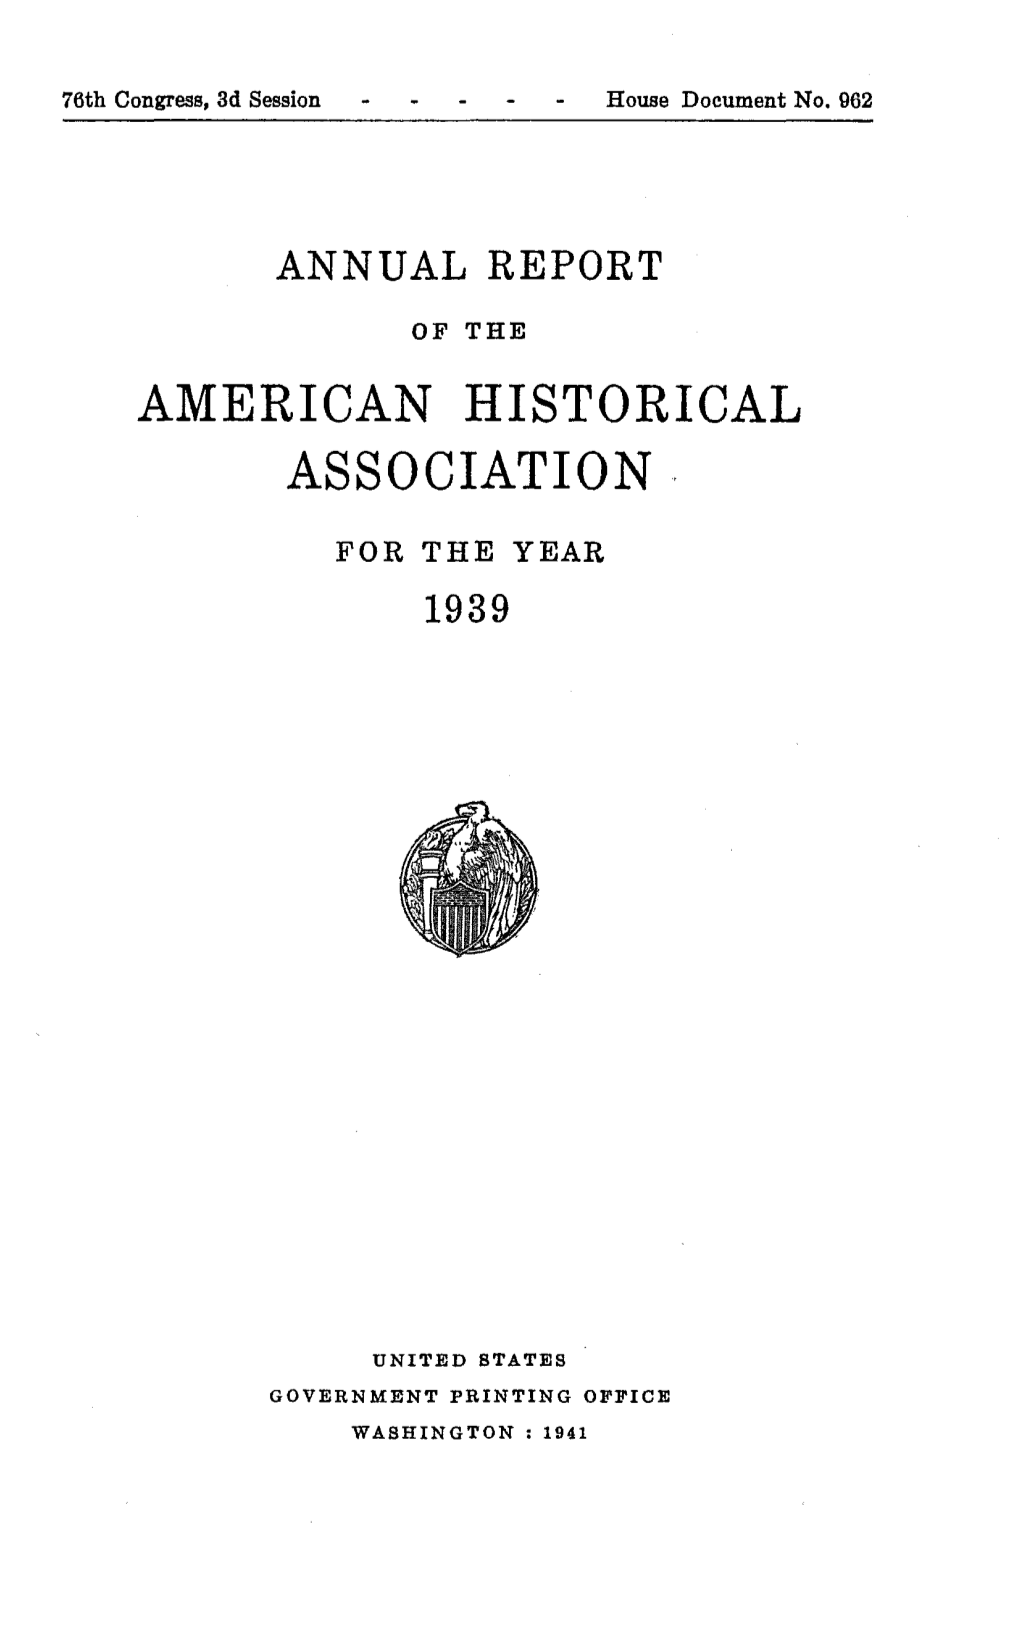 Annual Report .5 \, of the American Historical Association